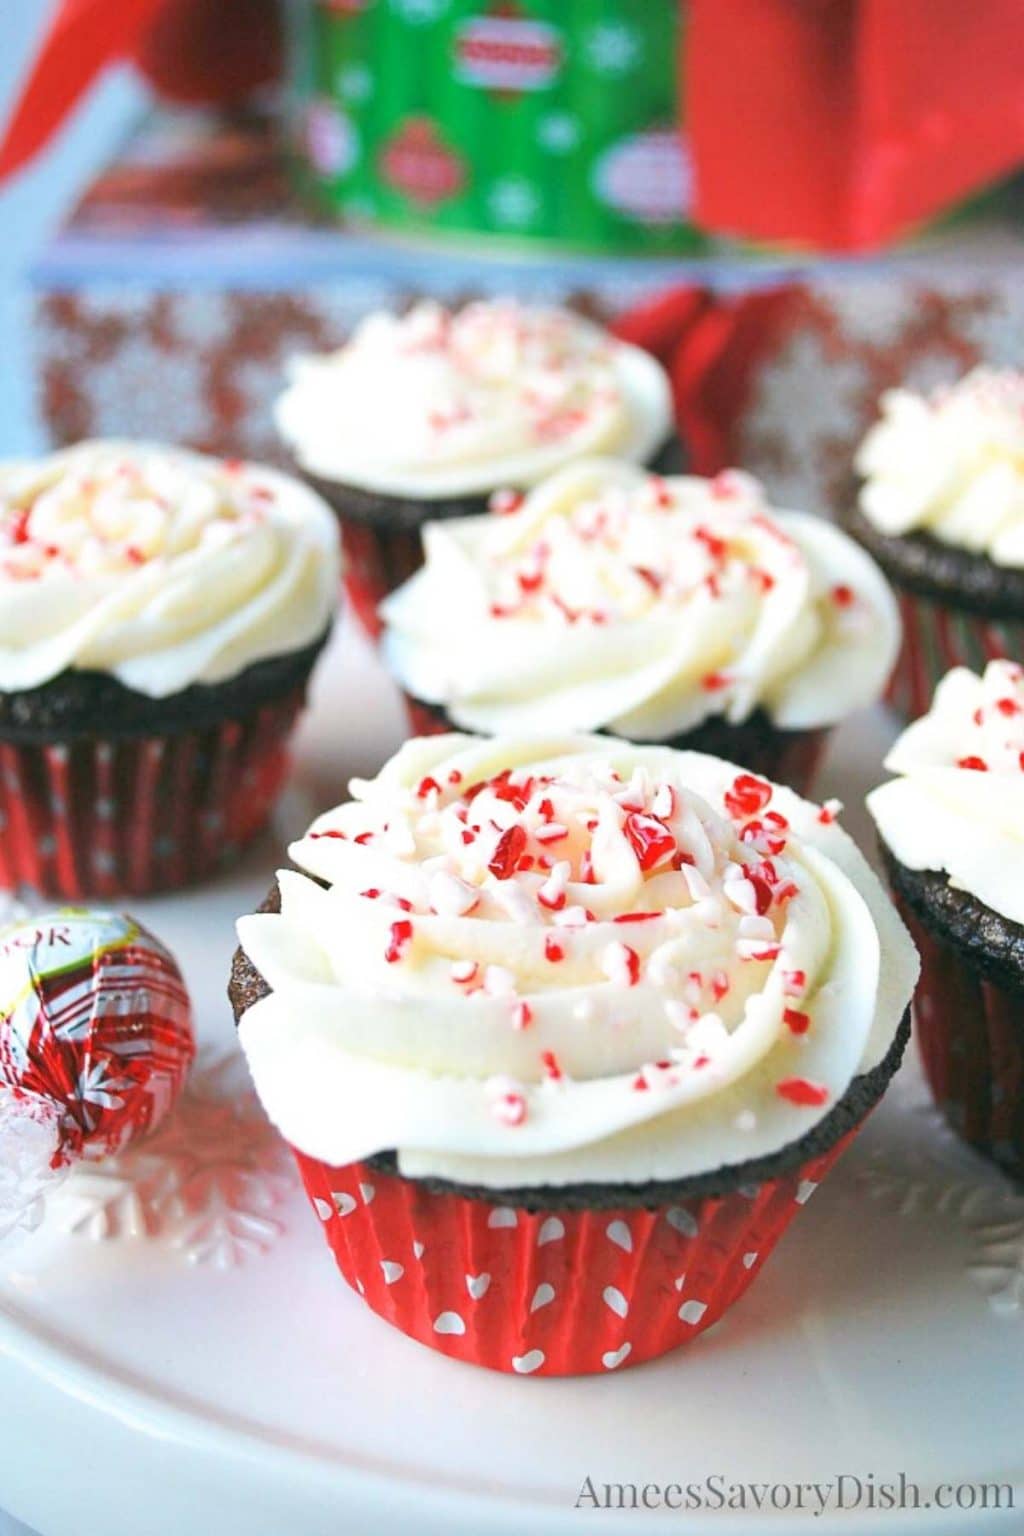 Mint Chocolate Cupcakes with Peppermint Frosting- Amee's Savory Dish